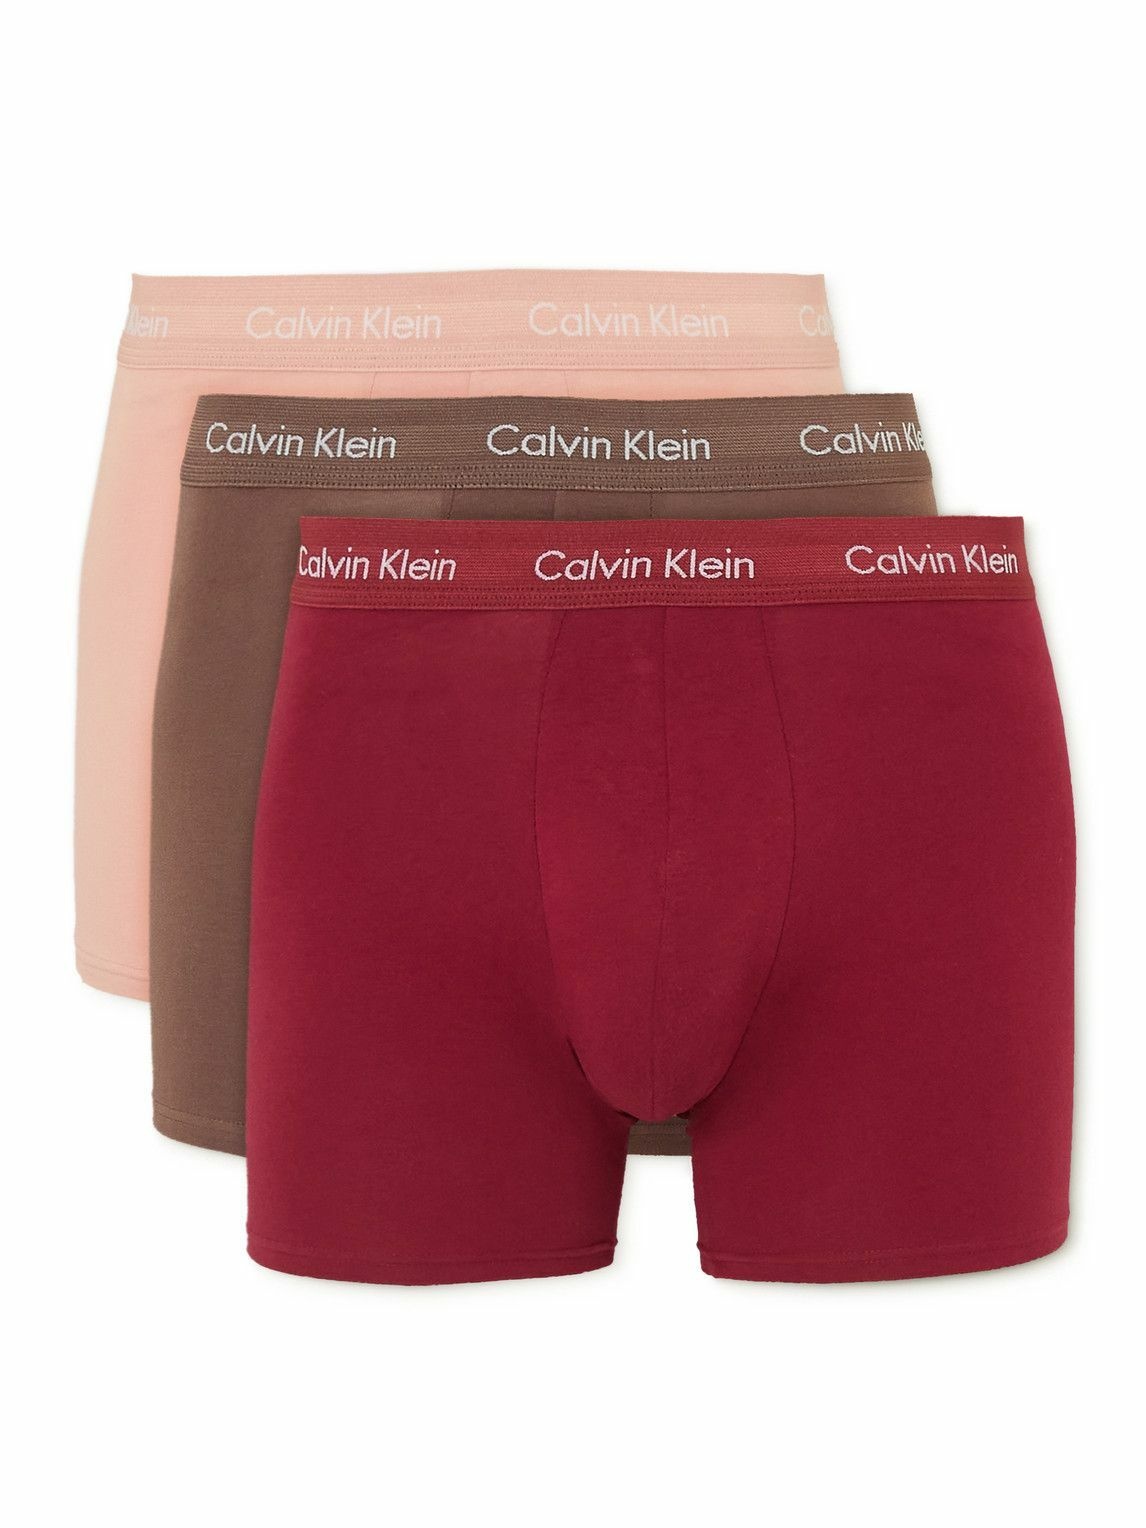 I Licked It so It's Mine Red Calvin Klein Boxer Briefs, FAST SHIPPING,  Birthday Day, Cotton Anniversary, Father's Day,  Sale -  Ireland